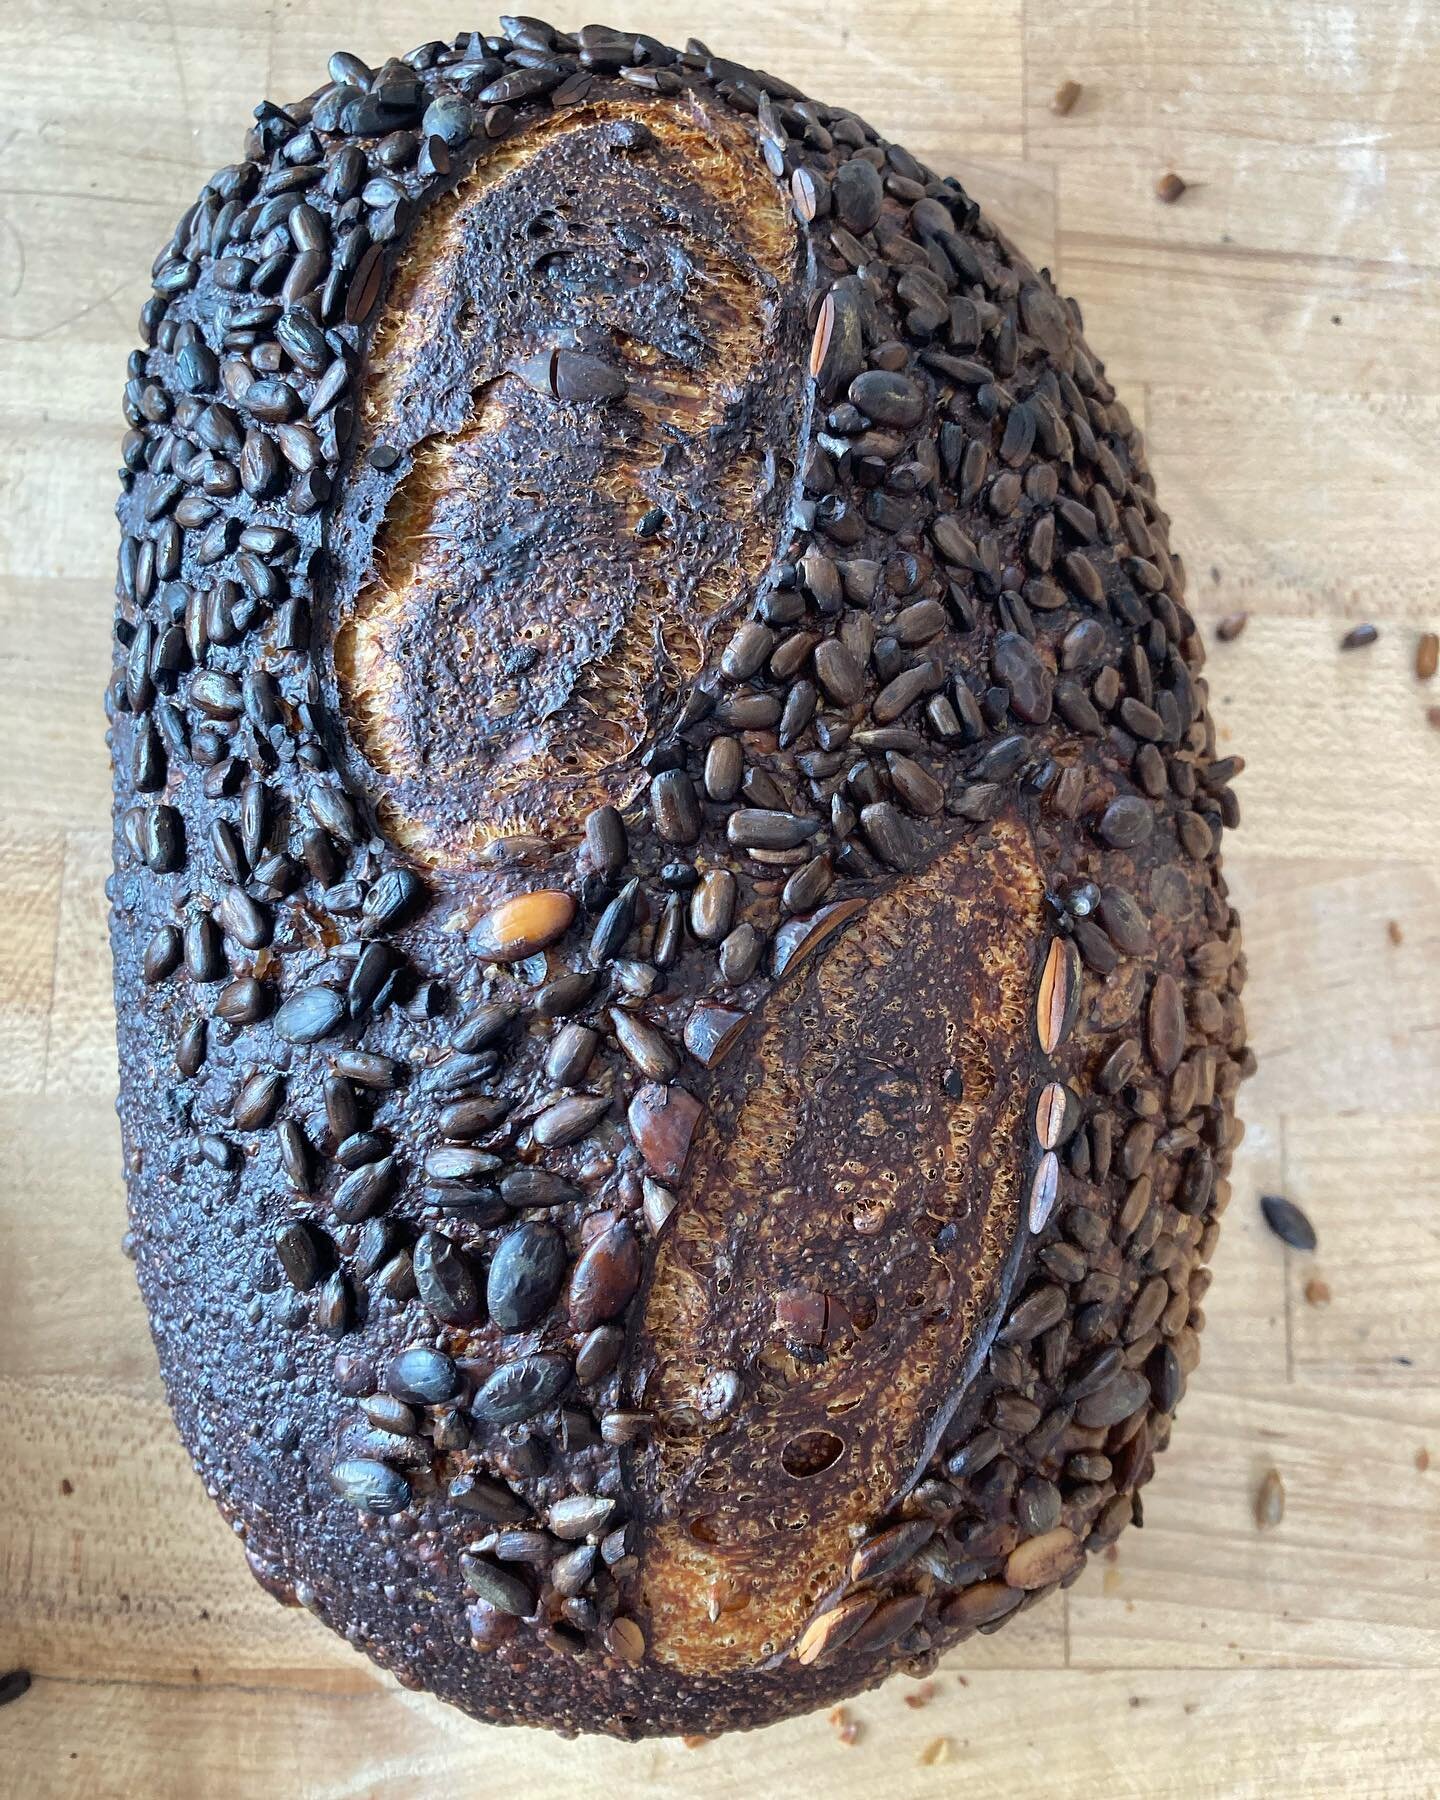 Introducing a new flavor: carbon. 

🤣😅 whoops-this one didn&rsquo;t make it out of the oven last round.
.
.
.
#sourdough #microbaker #alma #fairplay #localbread